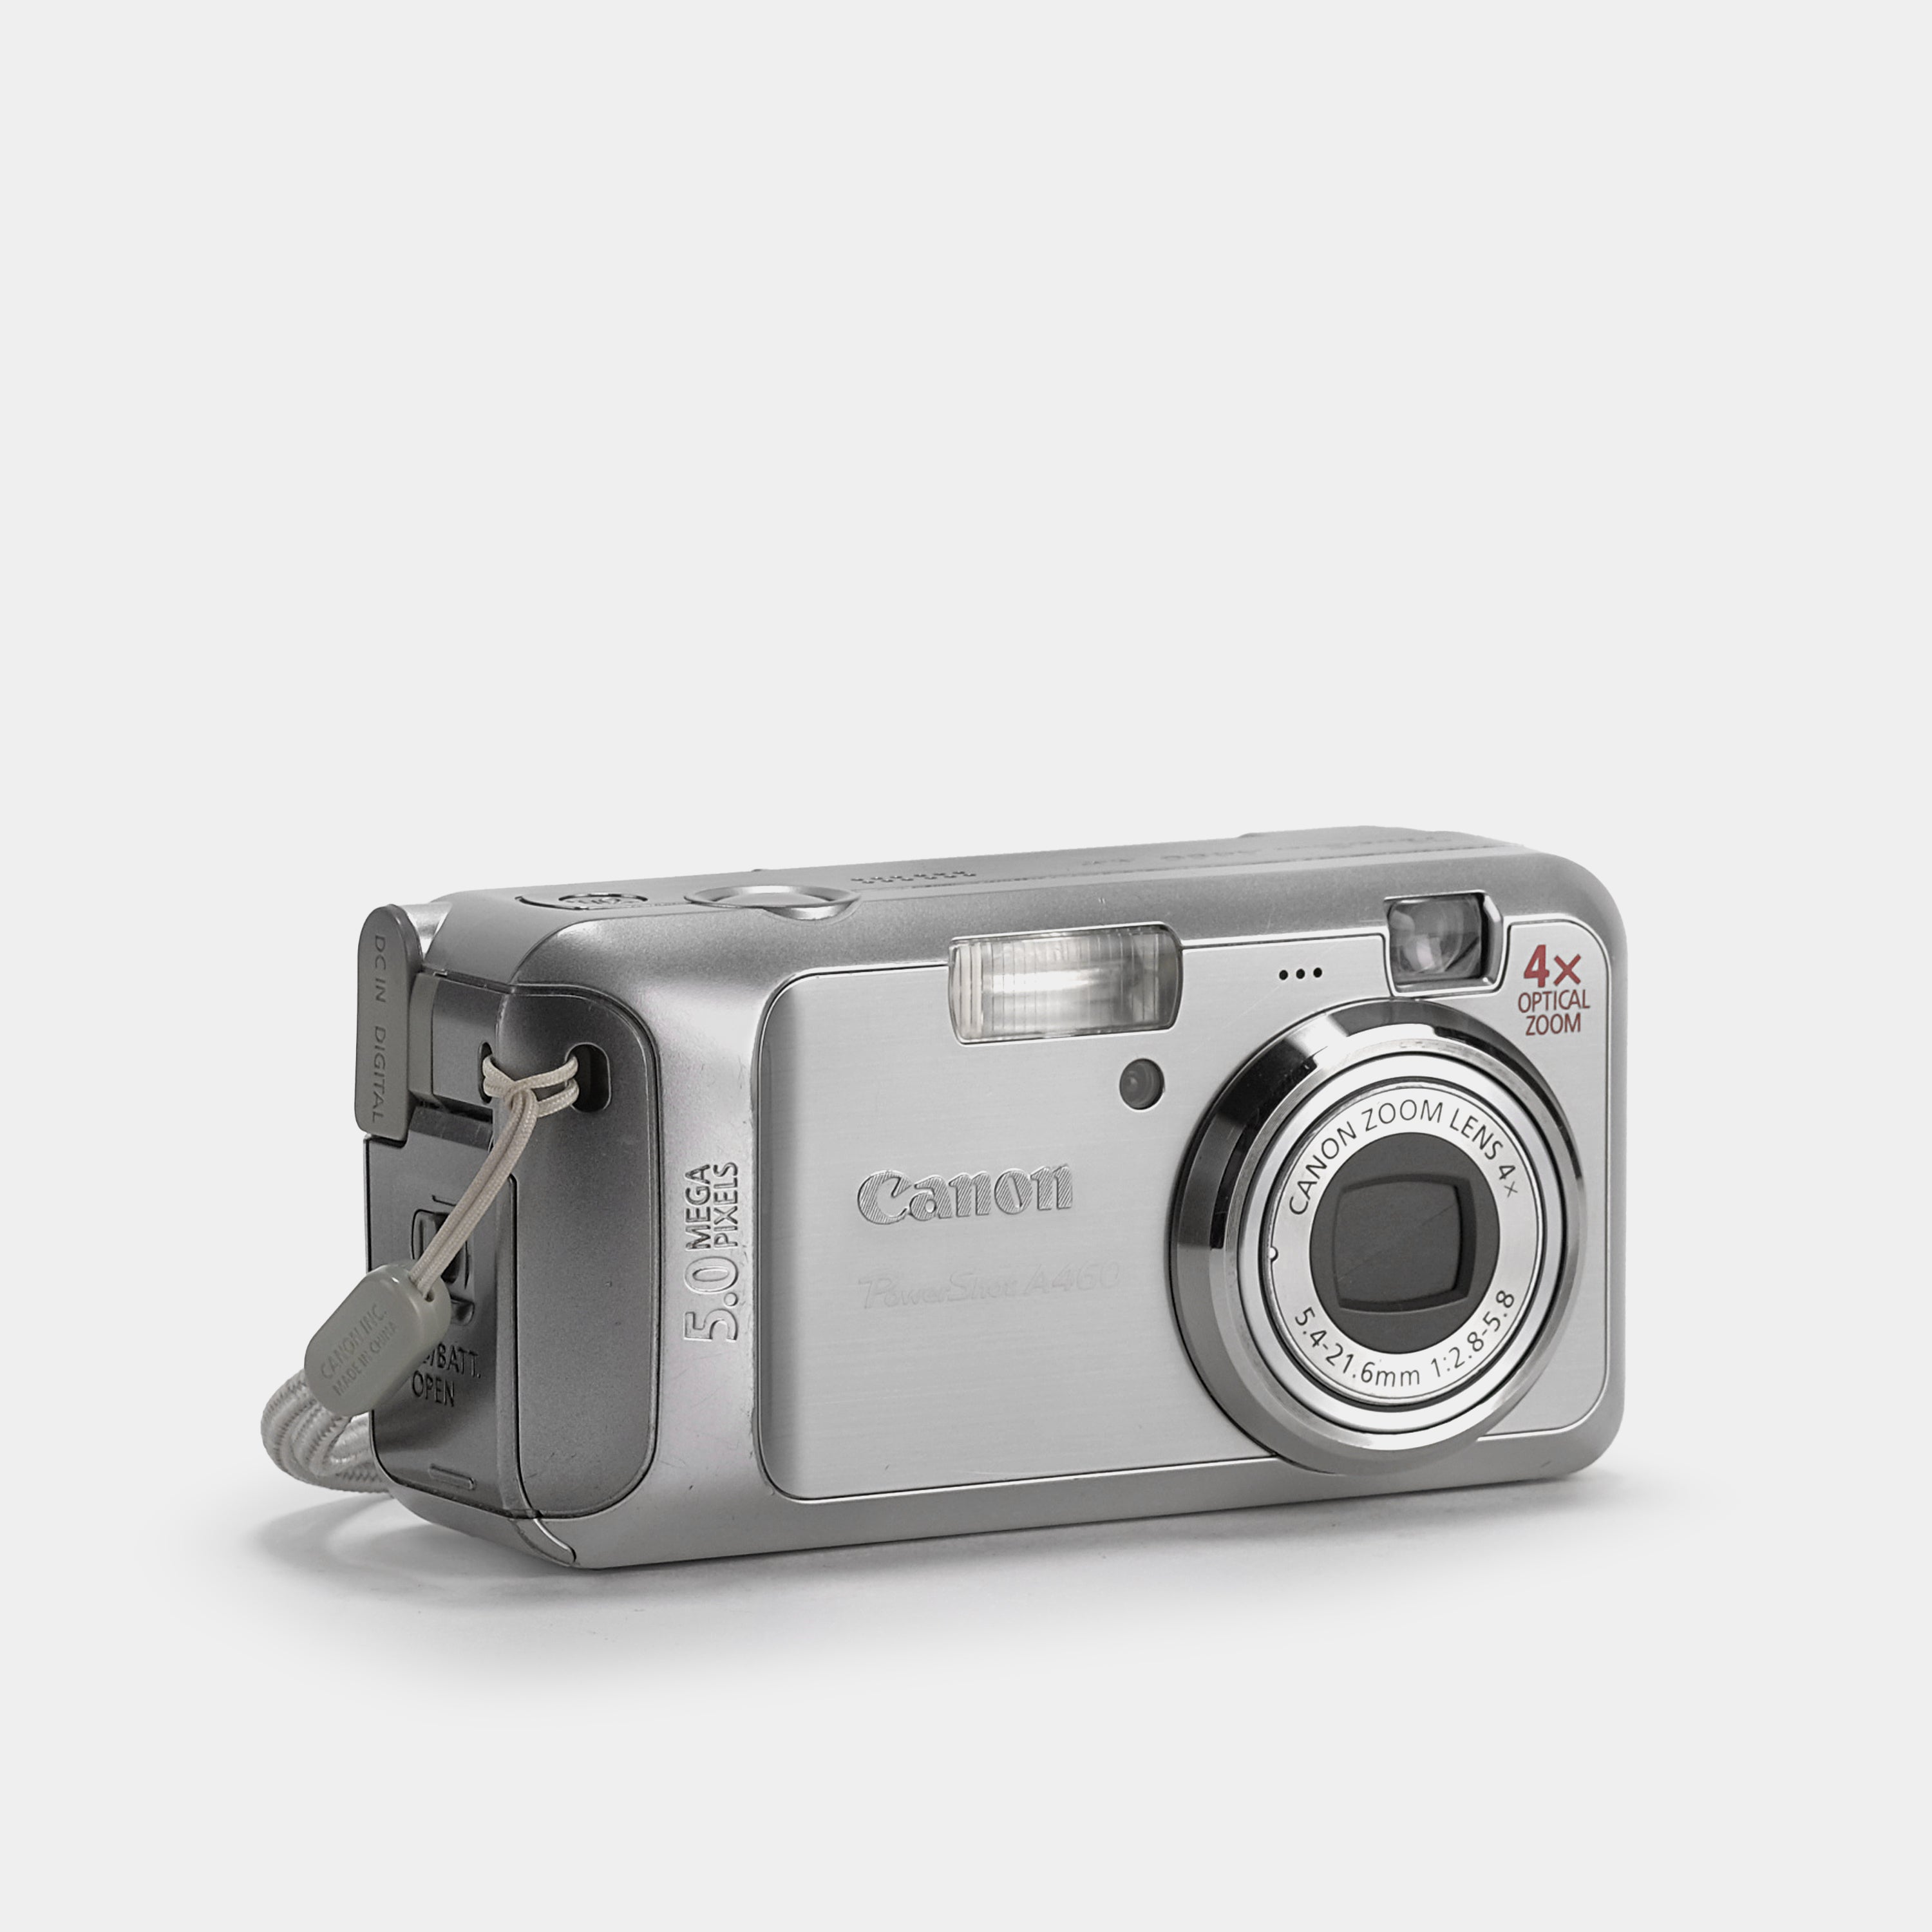 Canon PowerShot A460 Digital Point and Shoot Camera